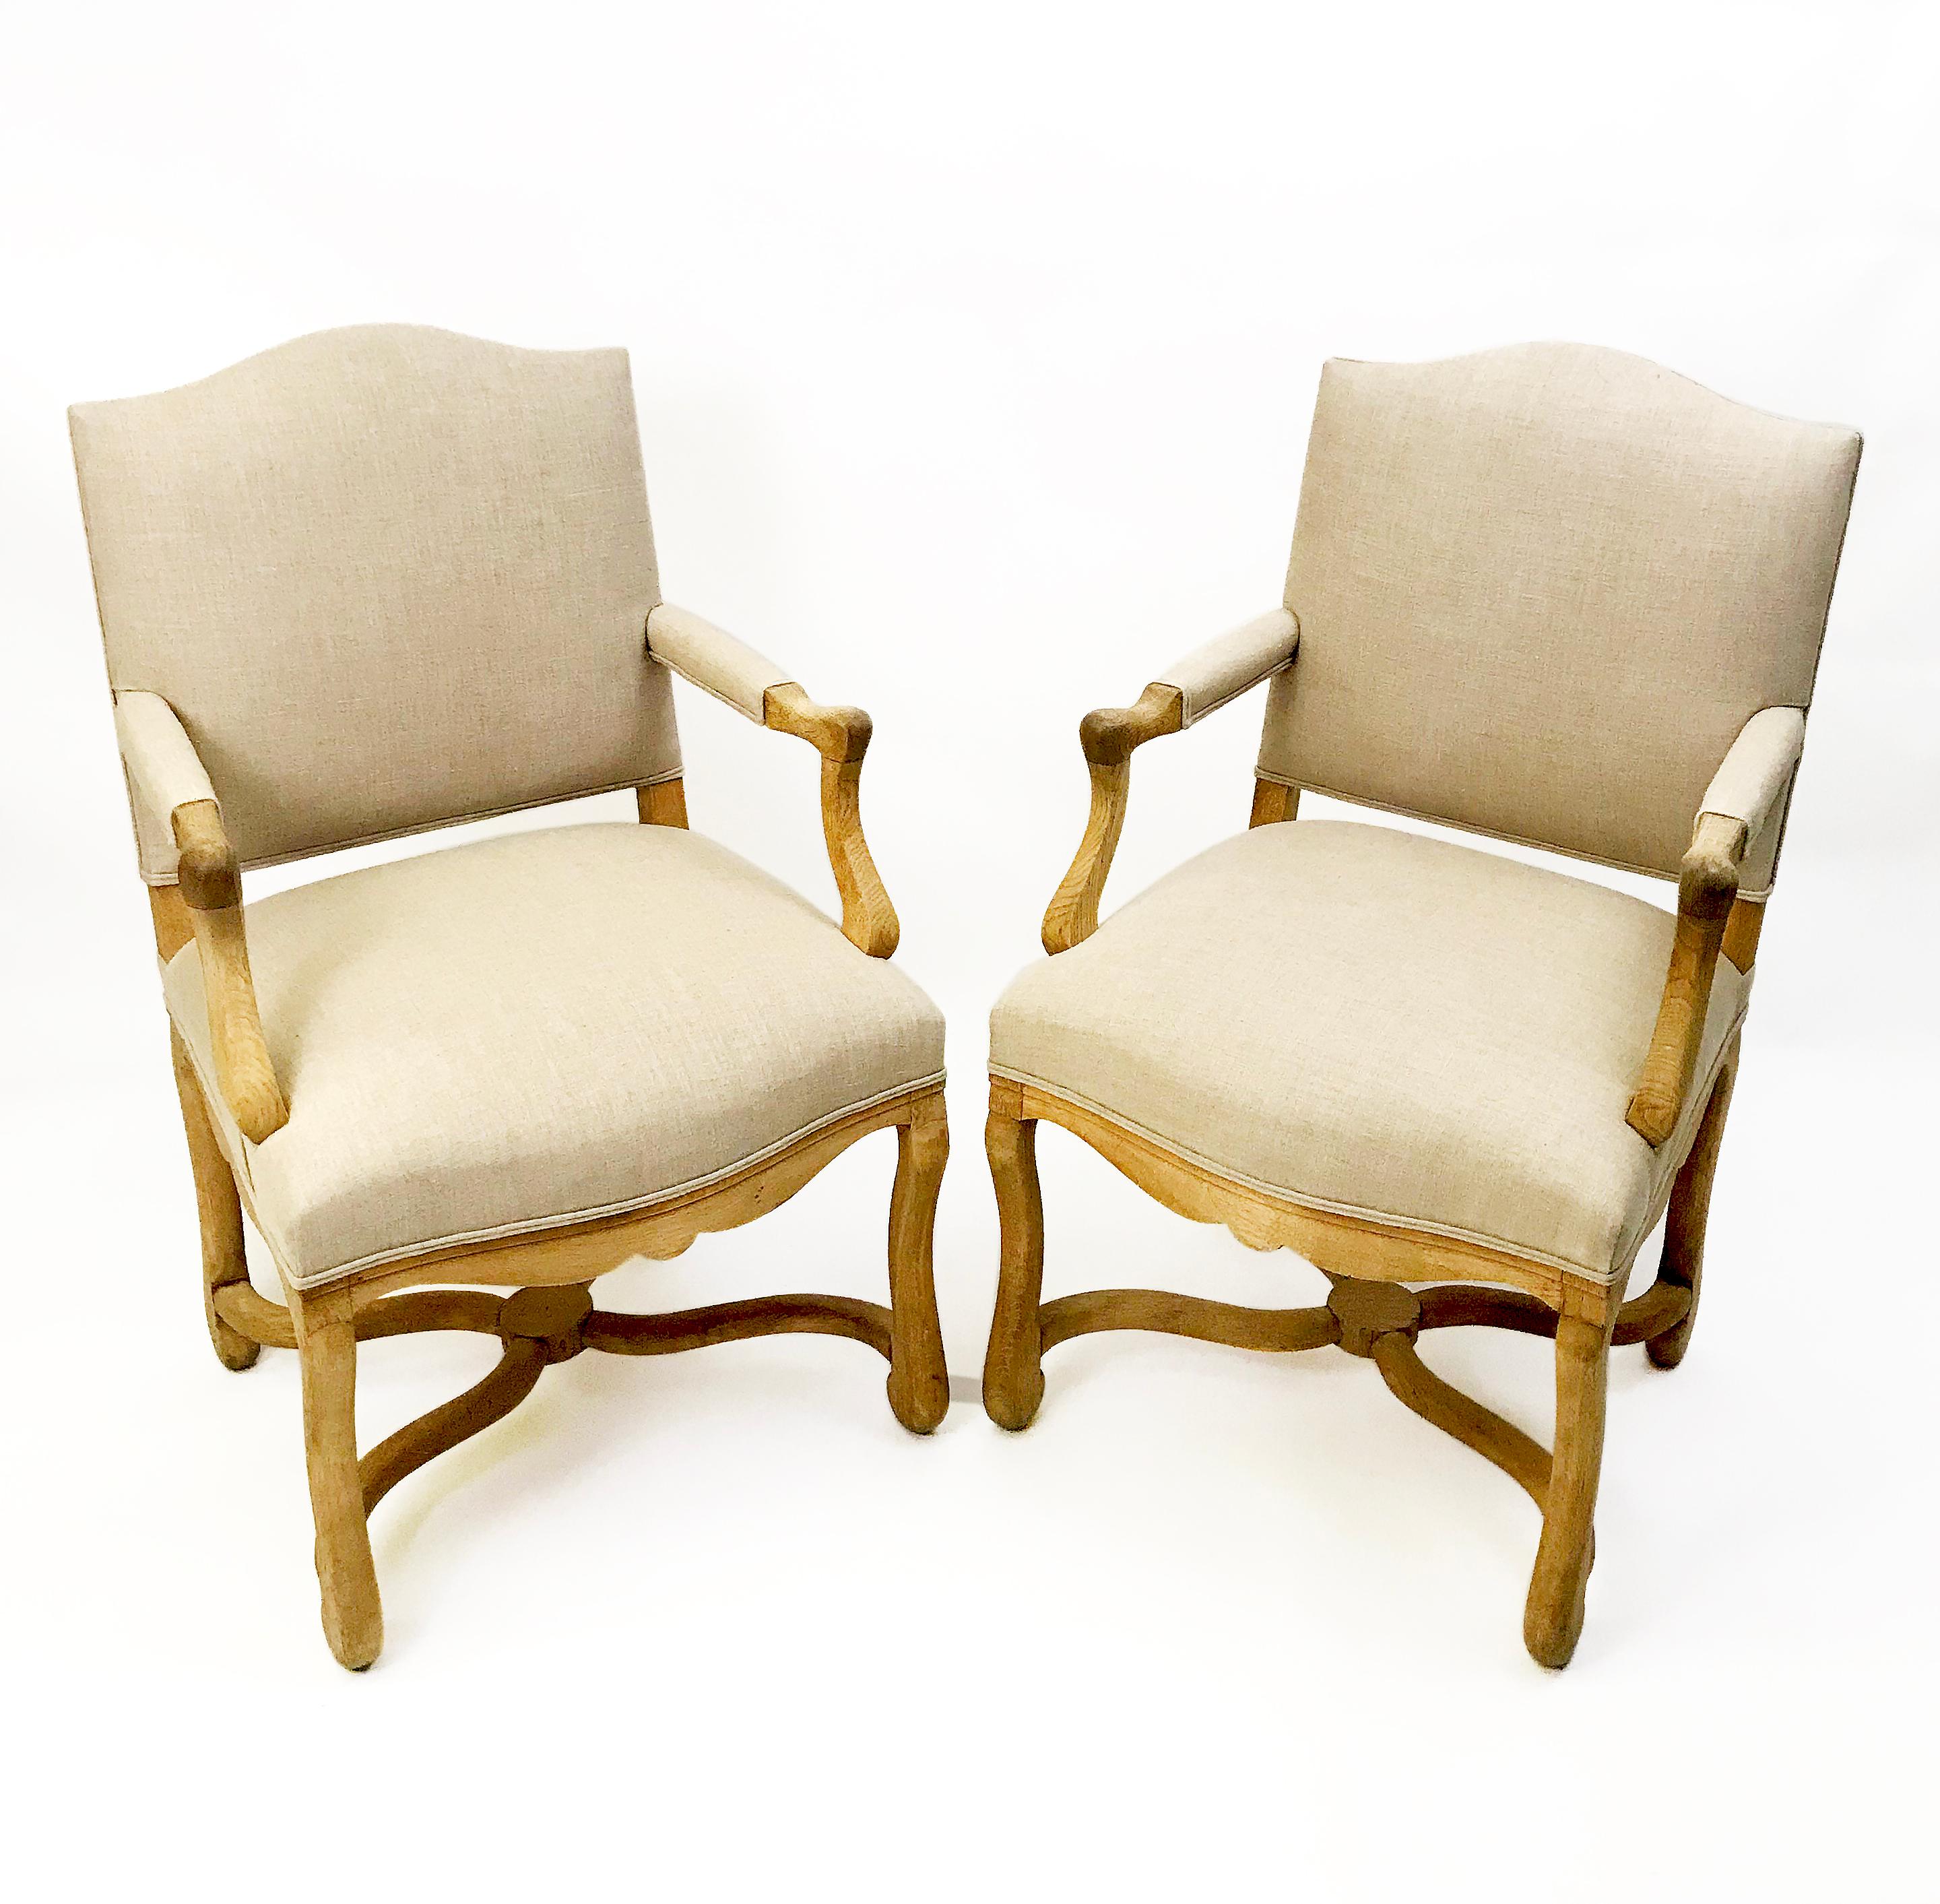 Early 20th Century OS DE MOUTON Bleached Oak Pair of Open Armchairs